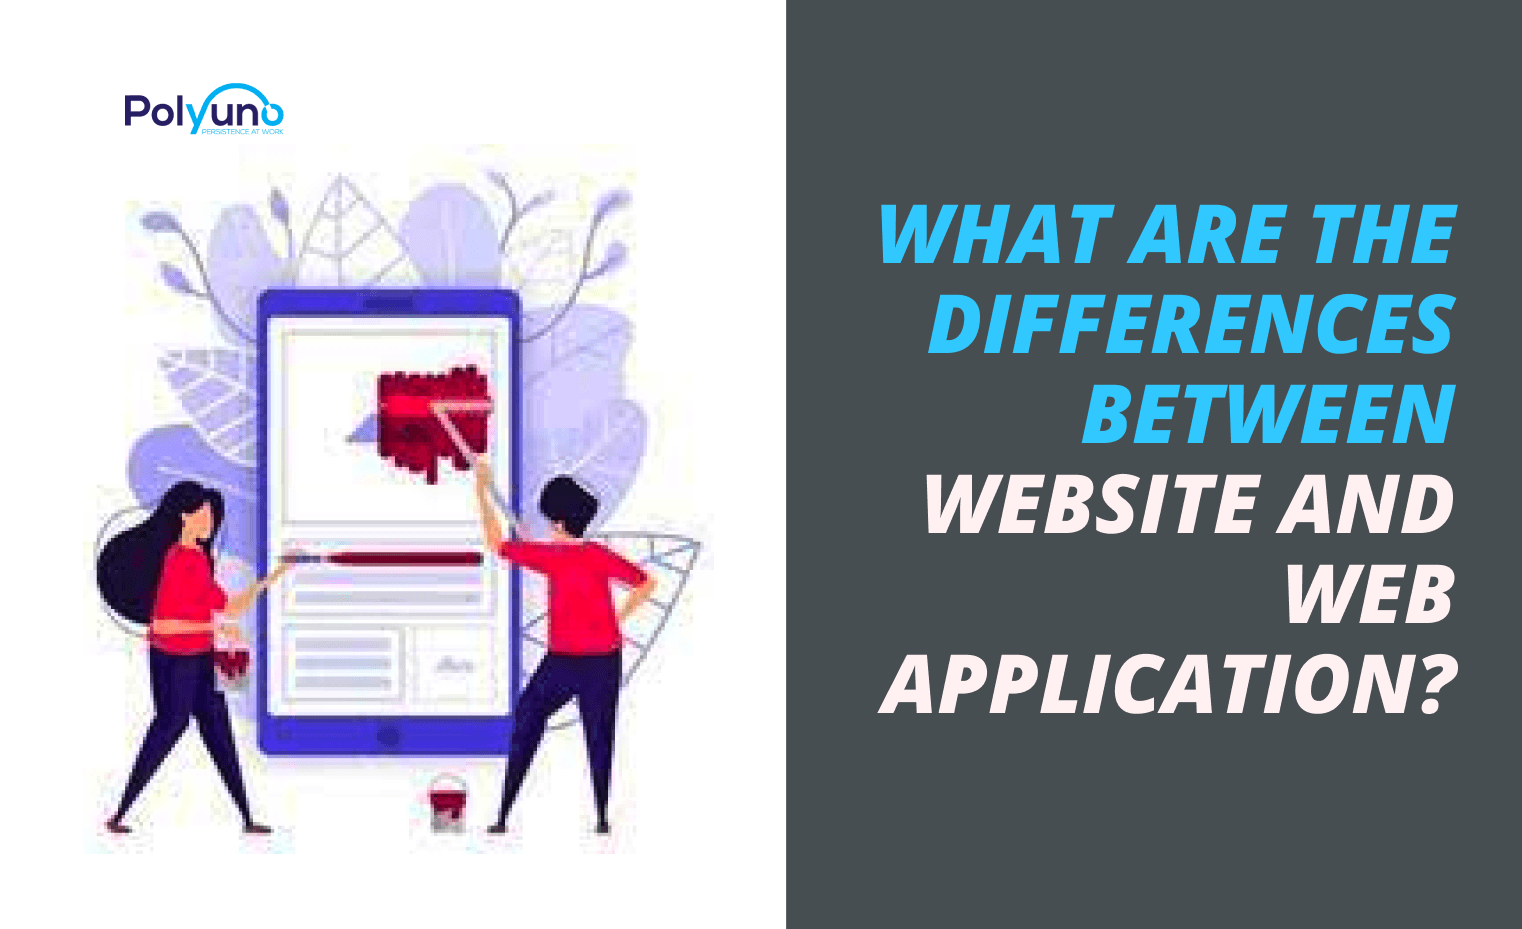 What Are The Differences Between Website And Web Application?